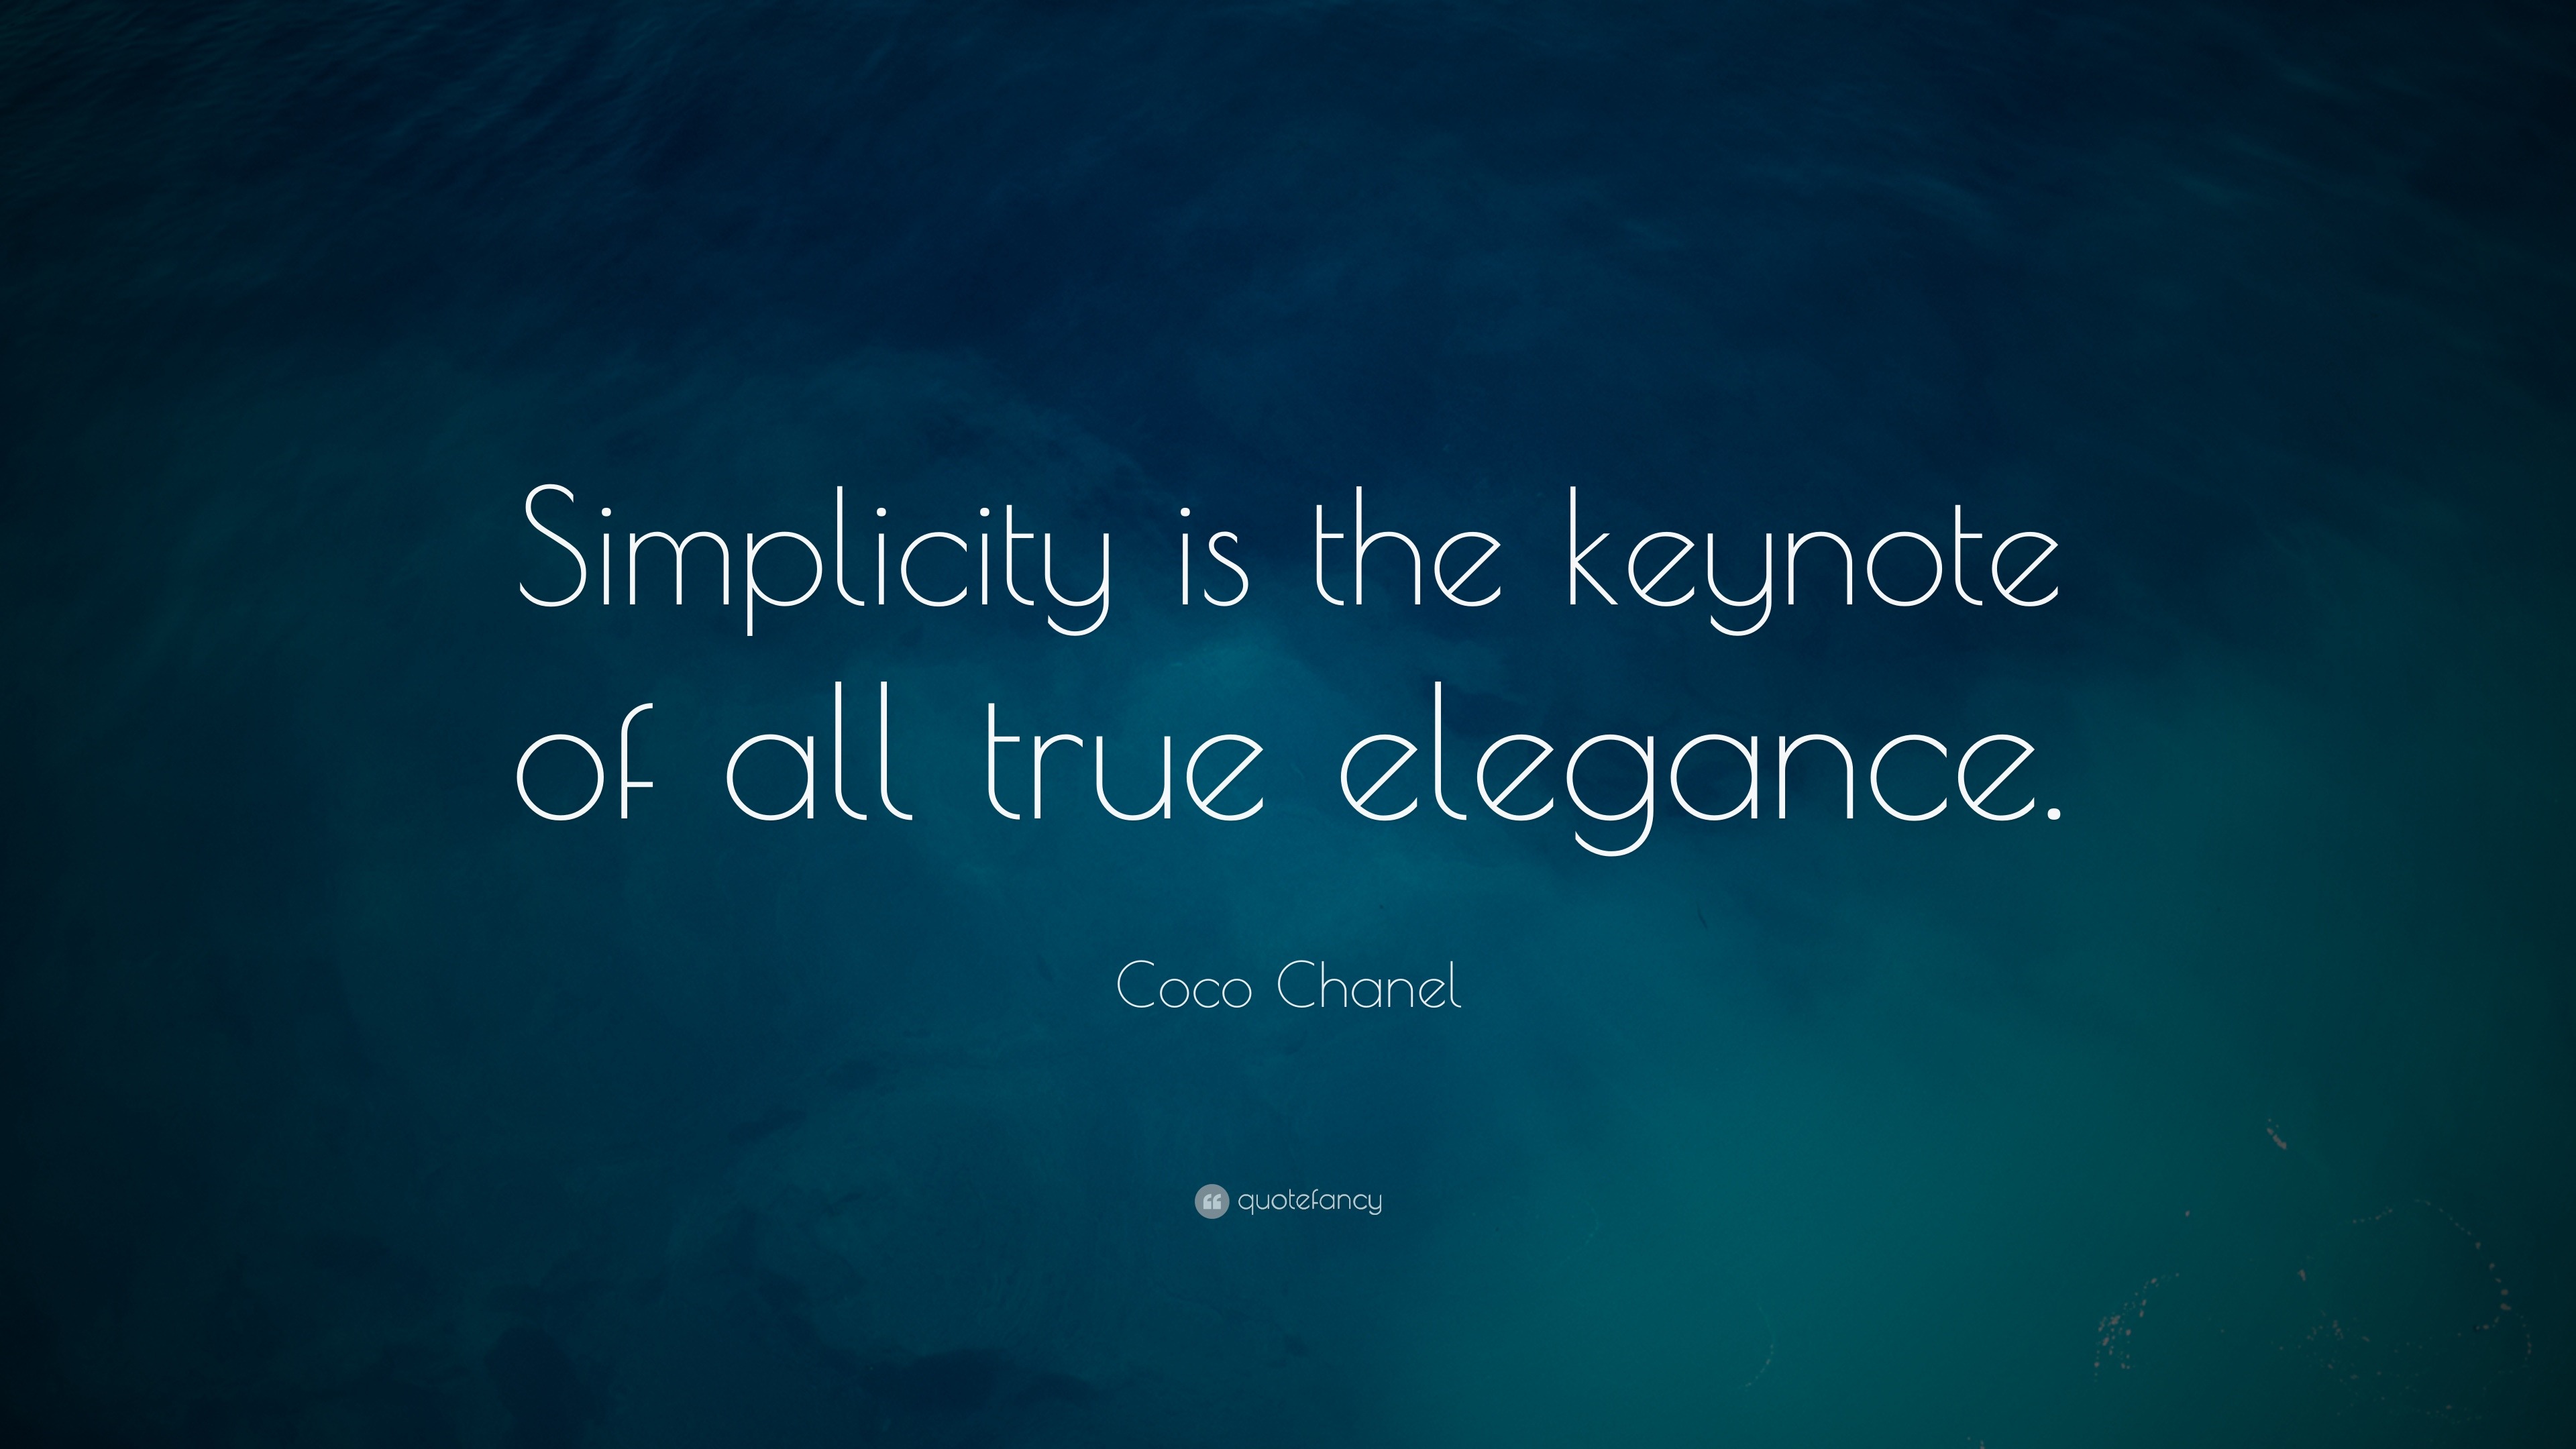 Happy Birthday Coco Chanel: Her 10 inspiring quotes